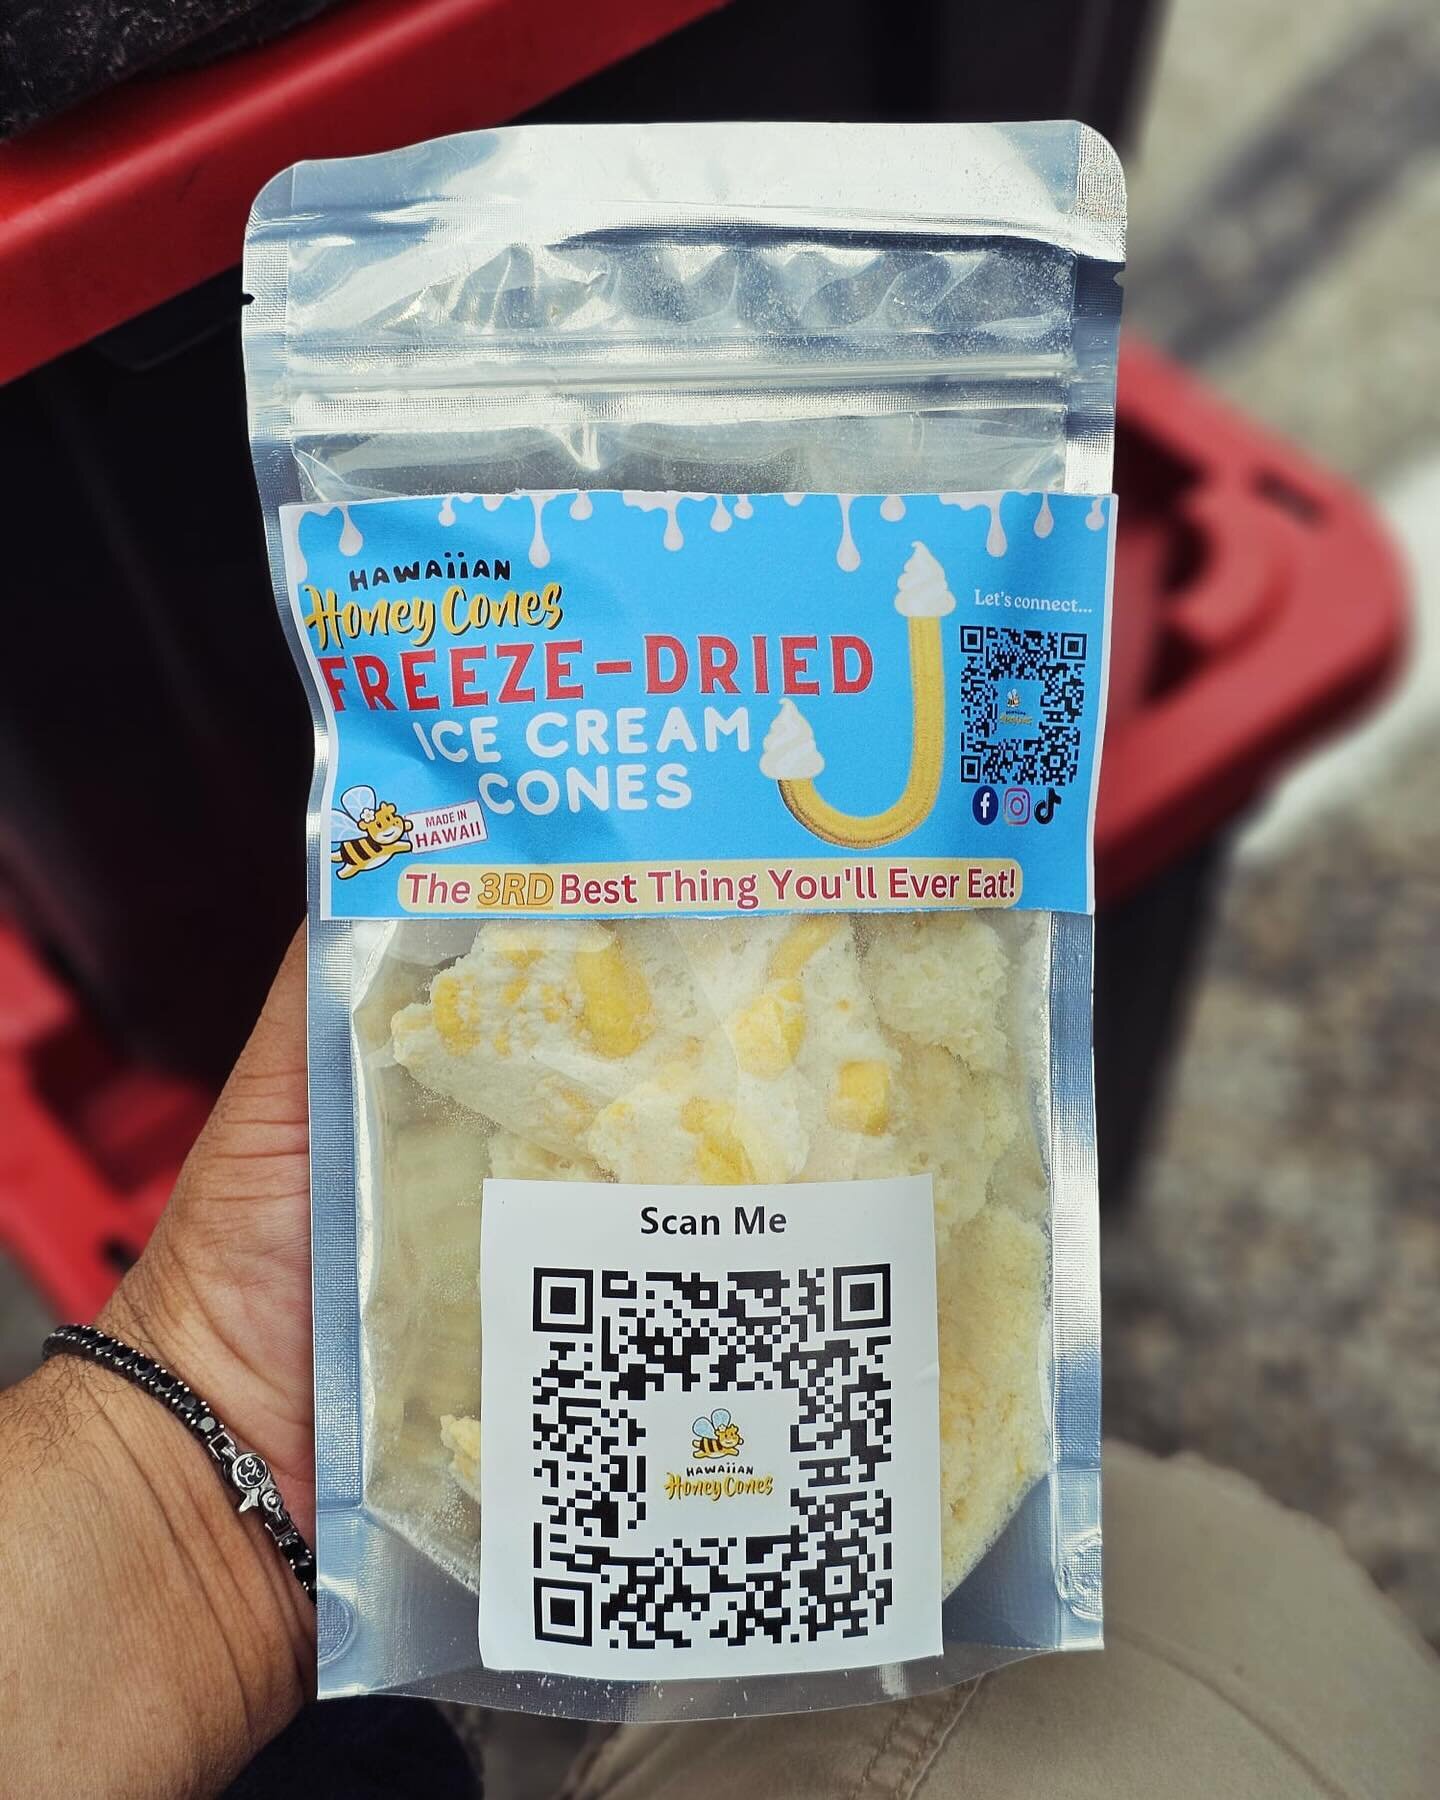 Want a Hawaiian Honey Cone to take home? Try our freeze-dried Hawaiian Honey Cone bites now selling at our events😋 All the love in one bag✨ Limited quantities available, more to announce soon🔜